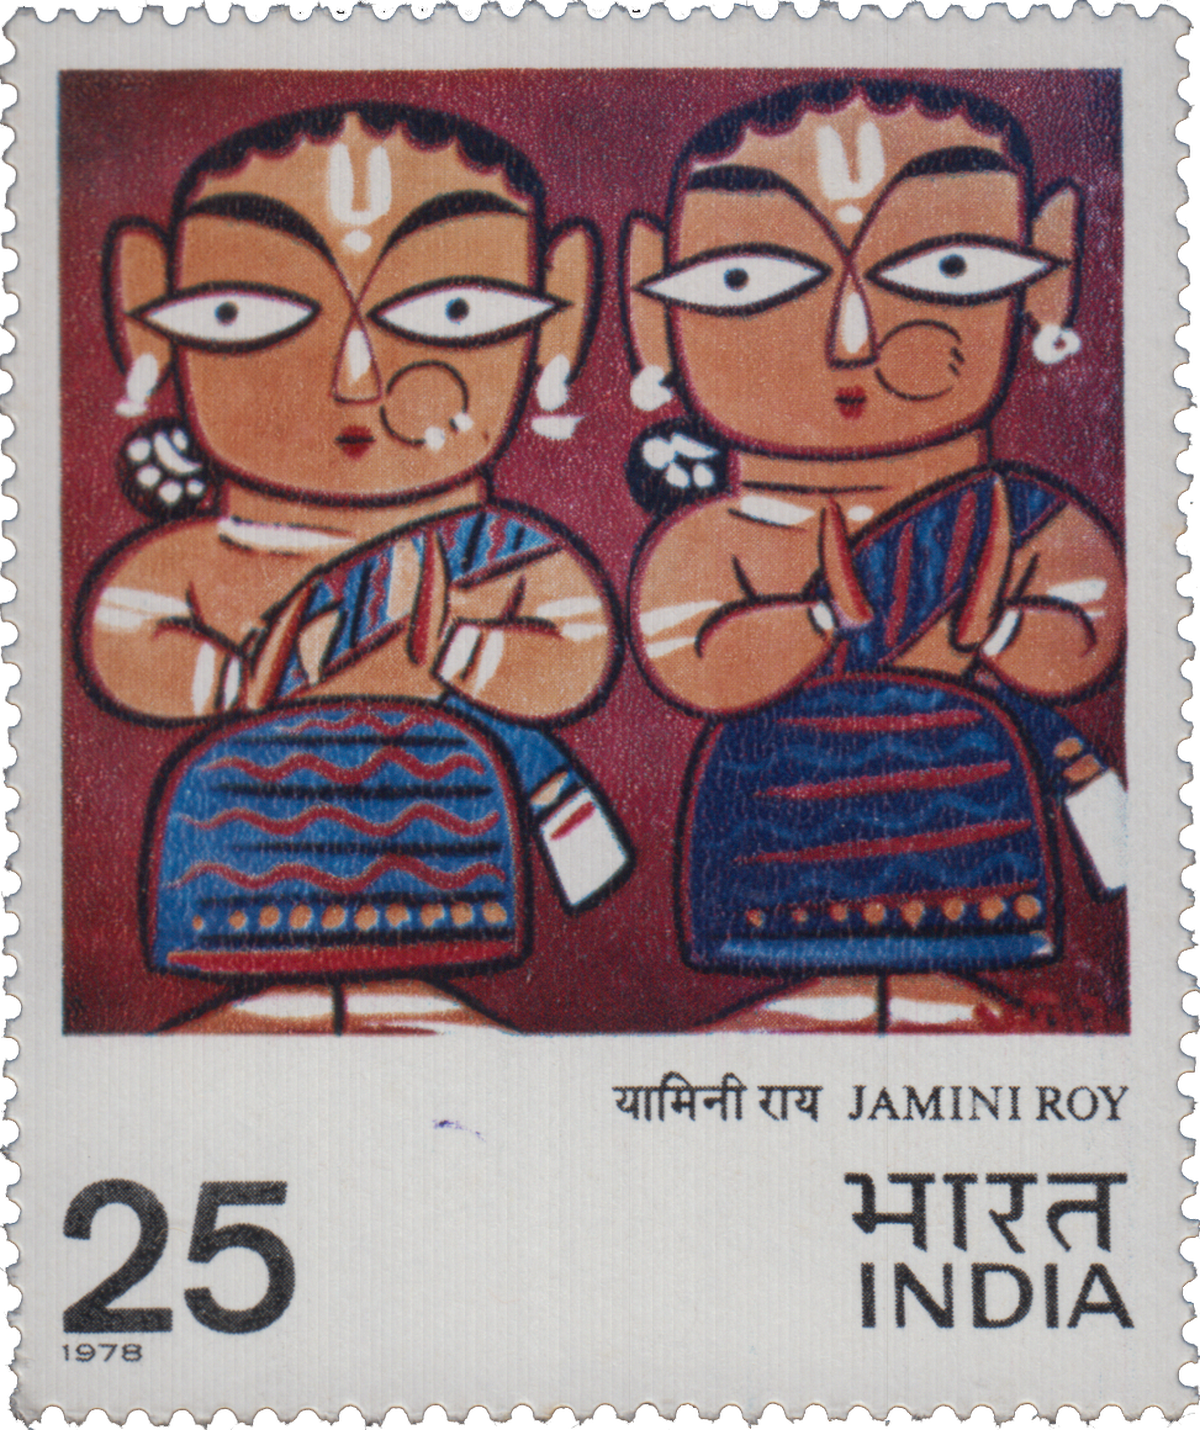 A stamp featuring an artwork by Jamini Roy 